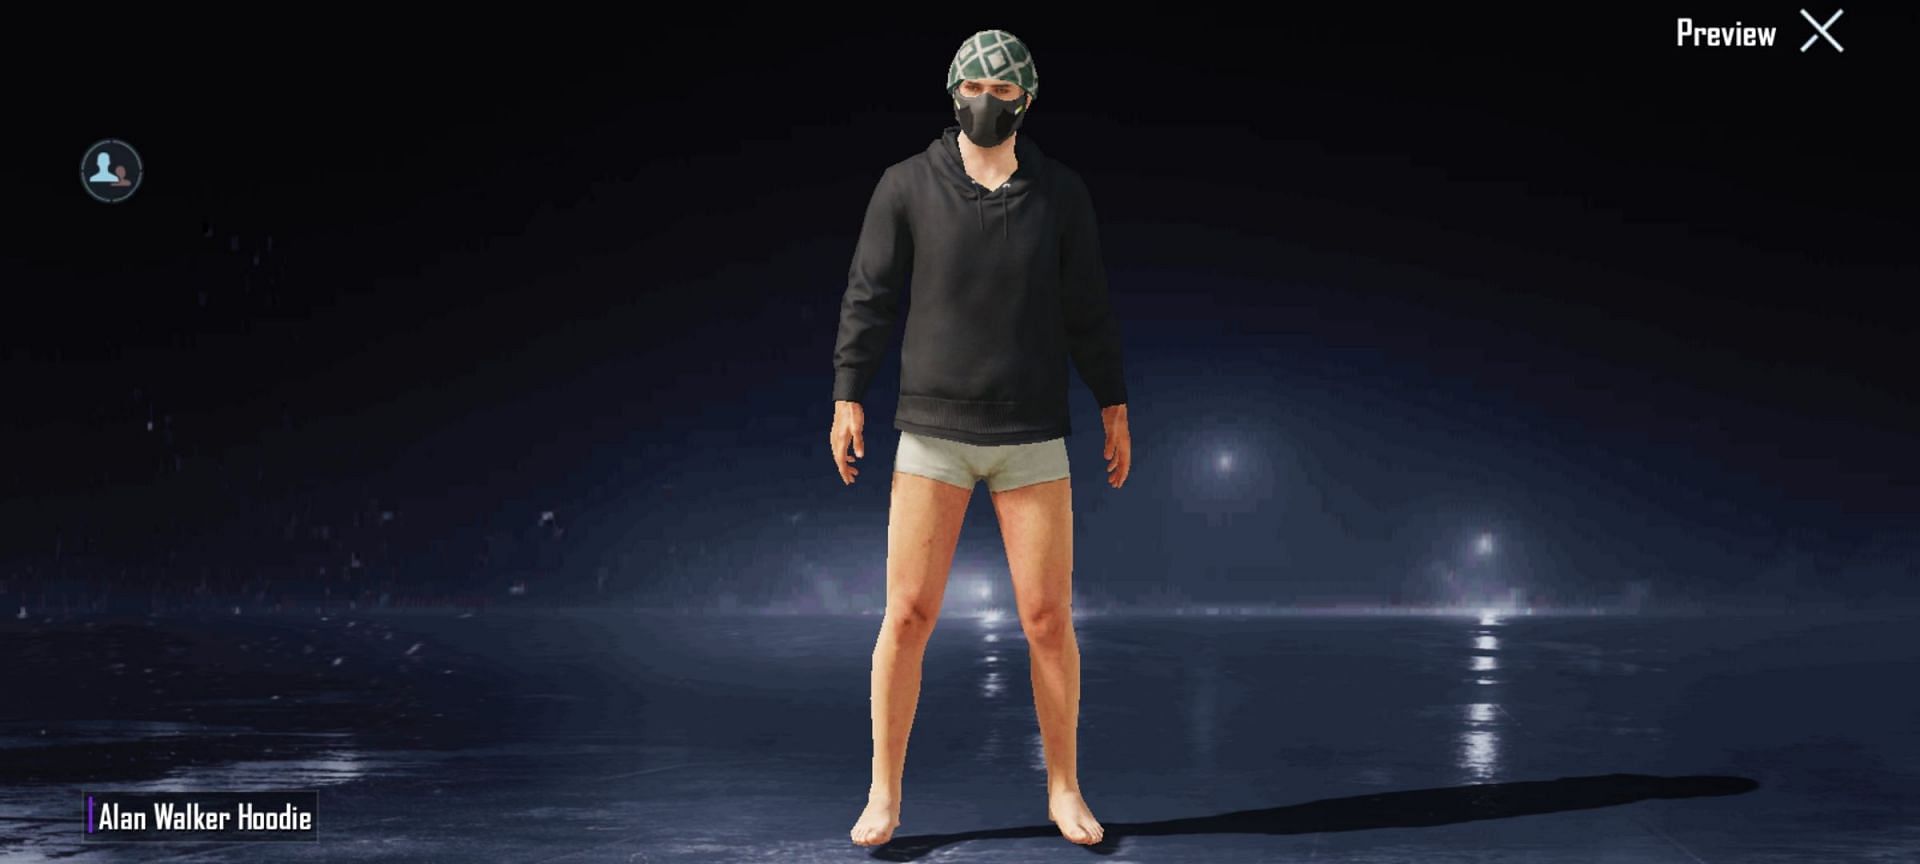 After logging in for 10 days, players will get this hoodie (Image via BGMI)